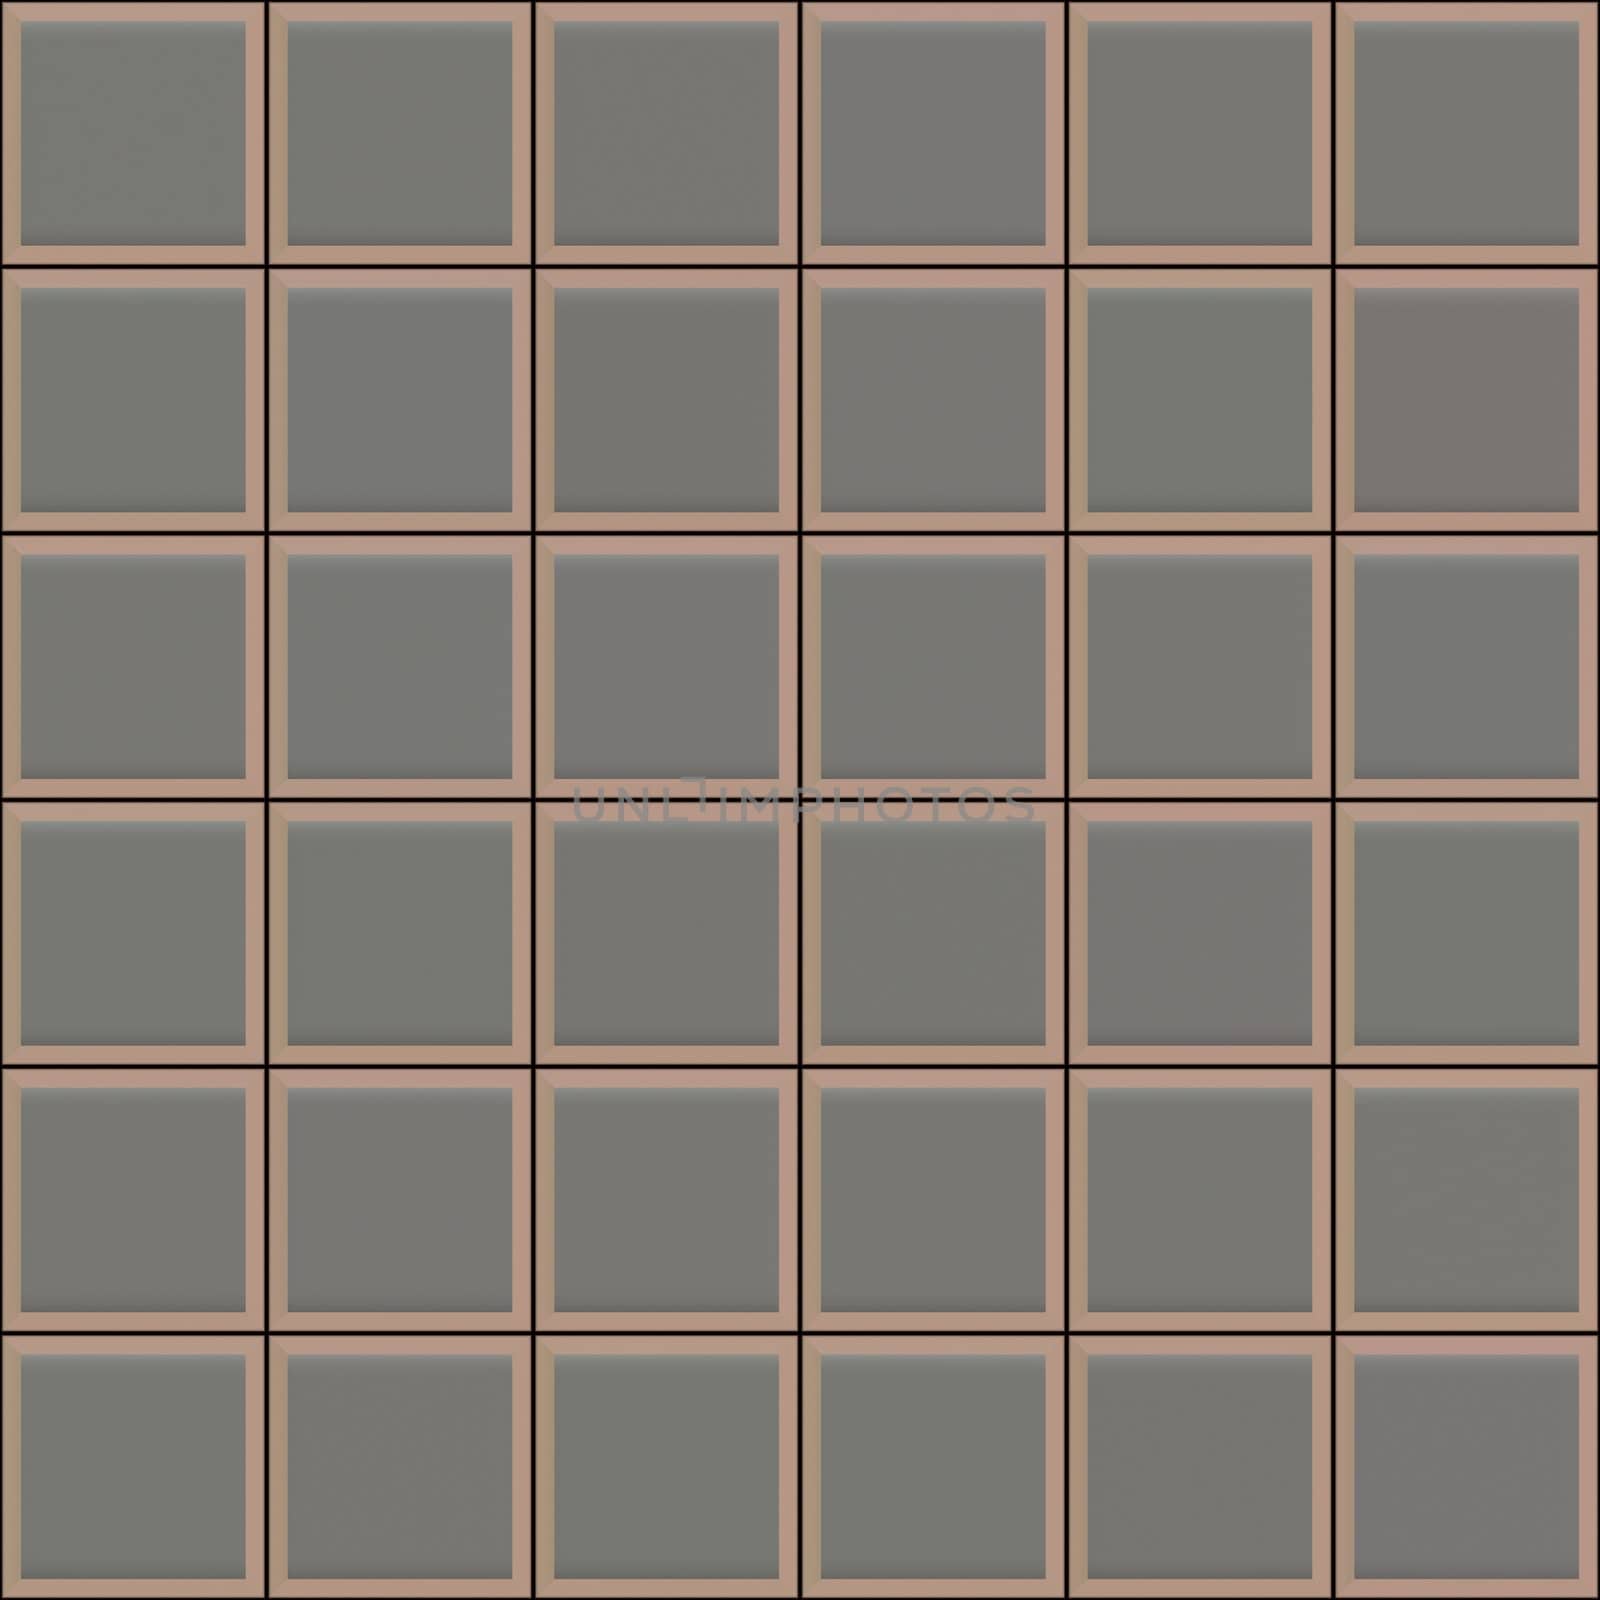 seamless 3d texture of grey tiles with brown borders and black mortar